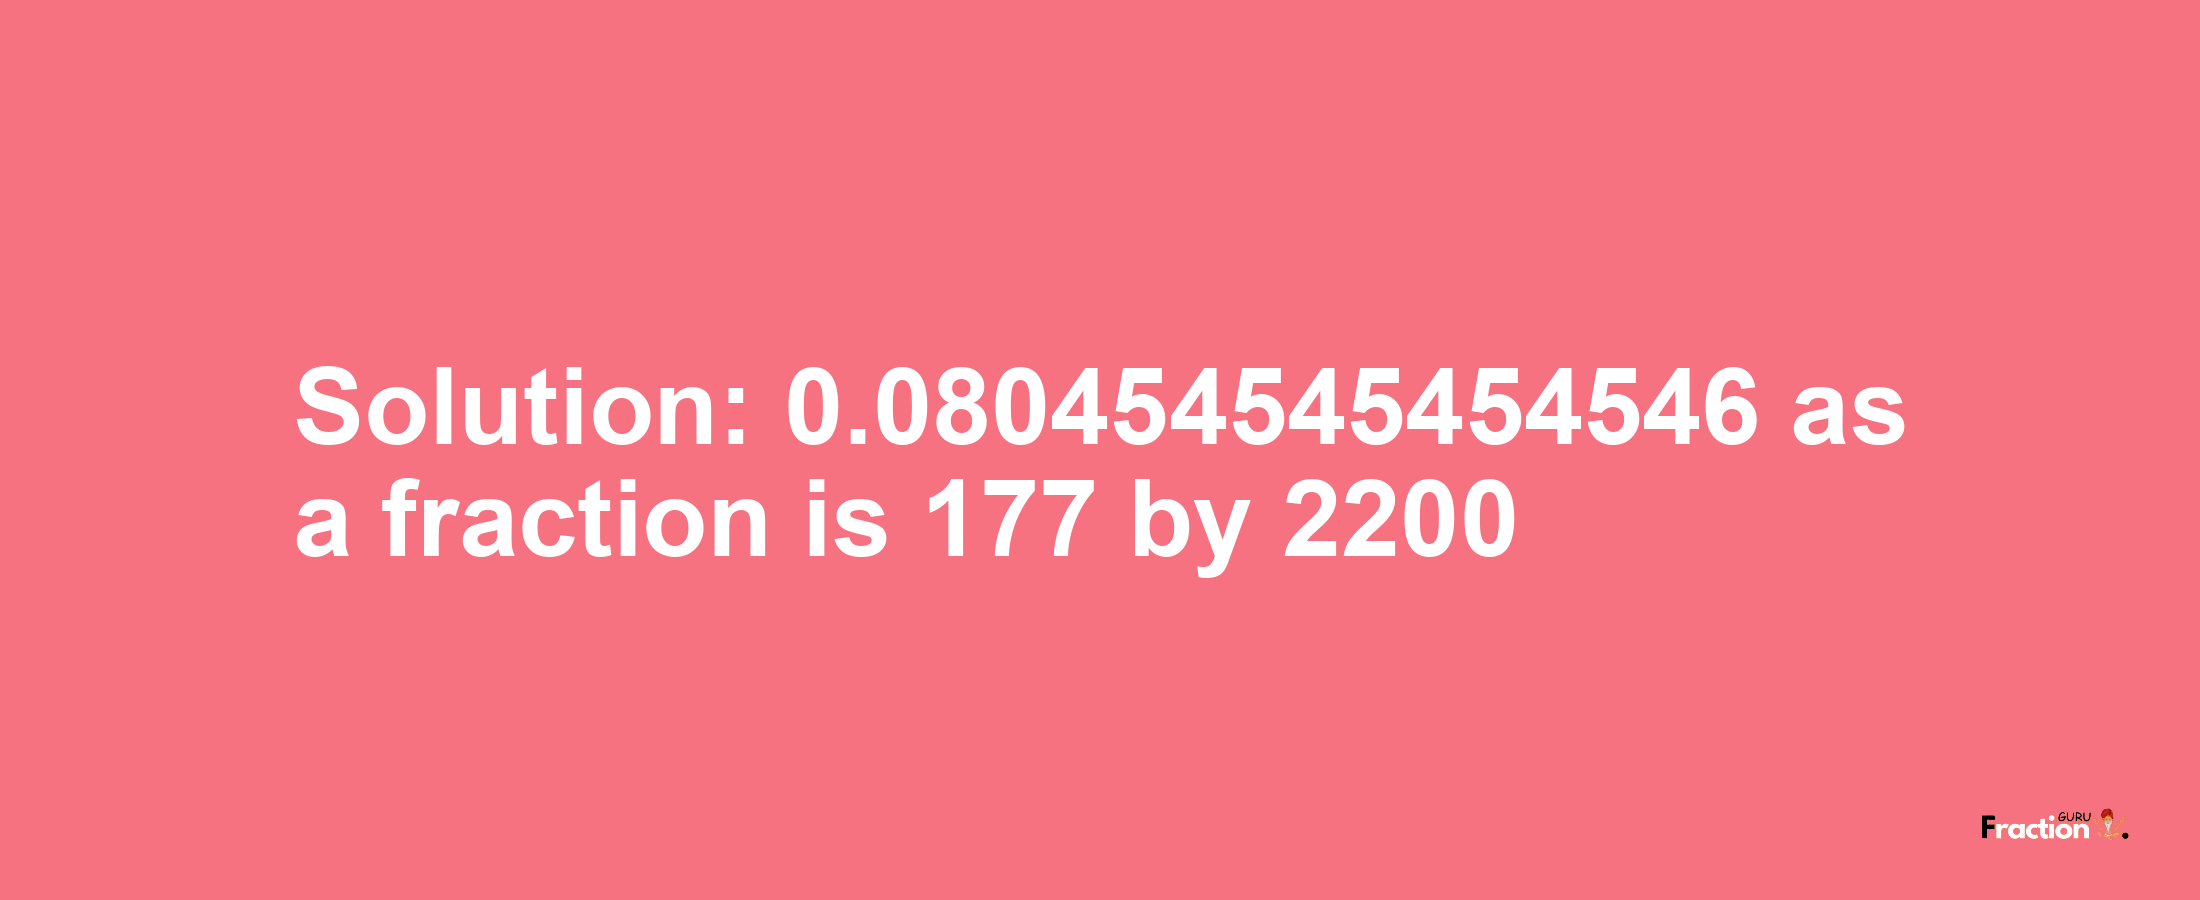 Solution:0.080454545454546 as a fraction is 177/2200